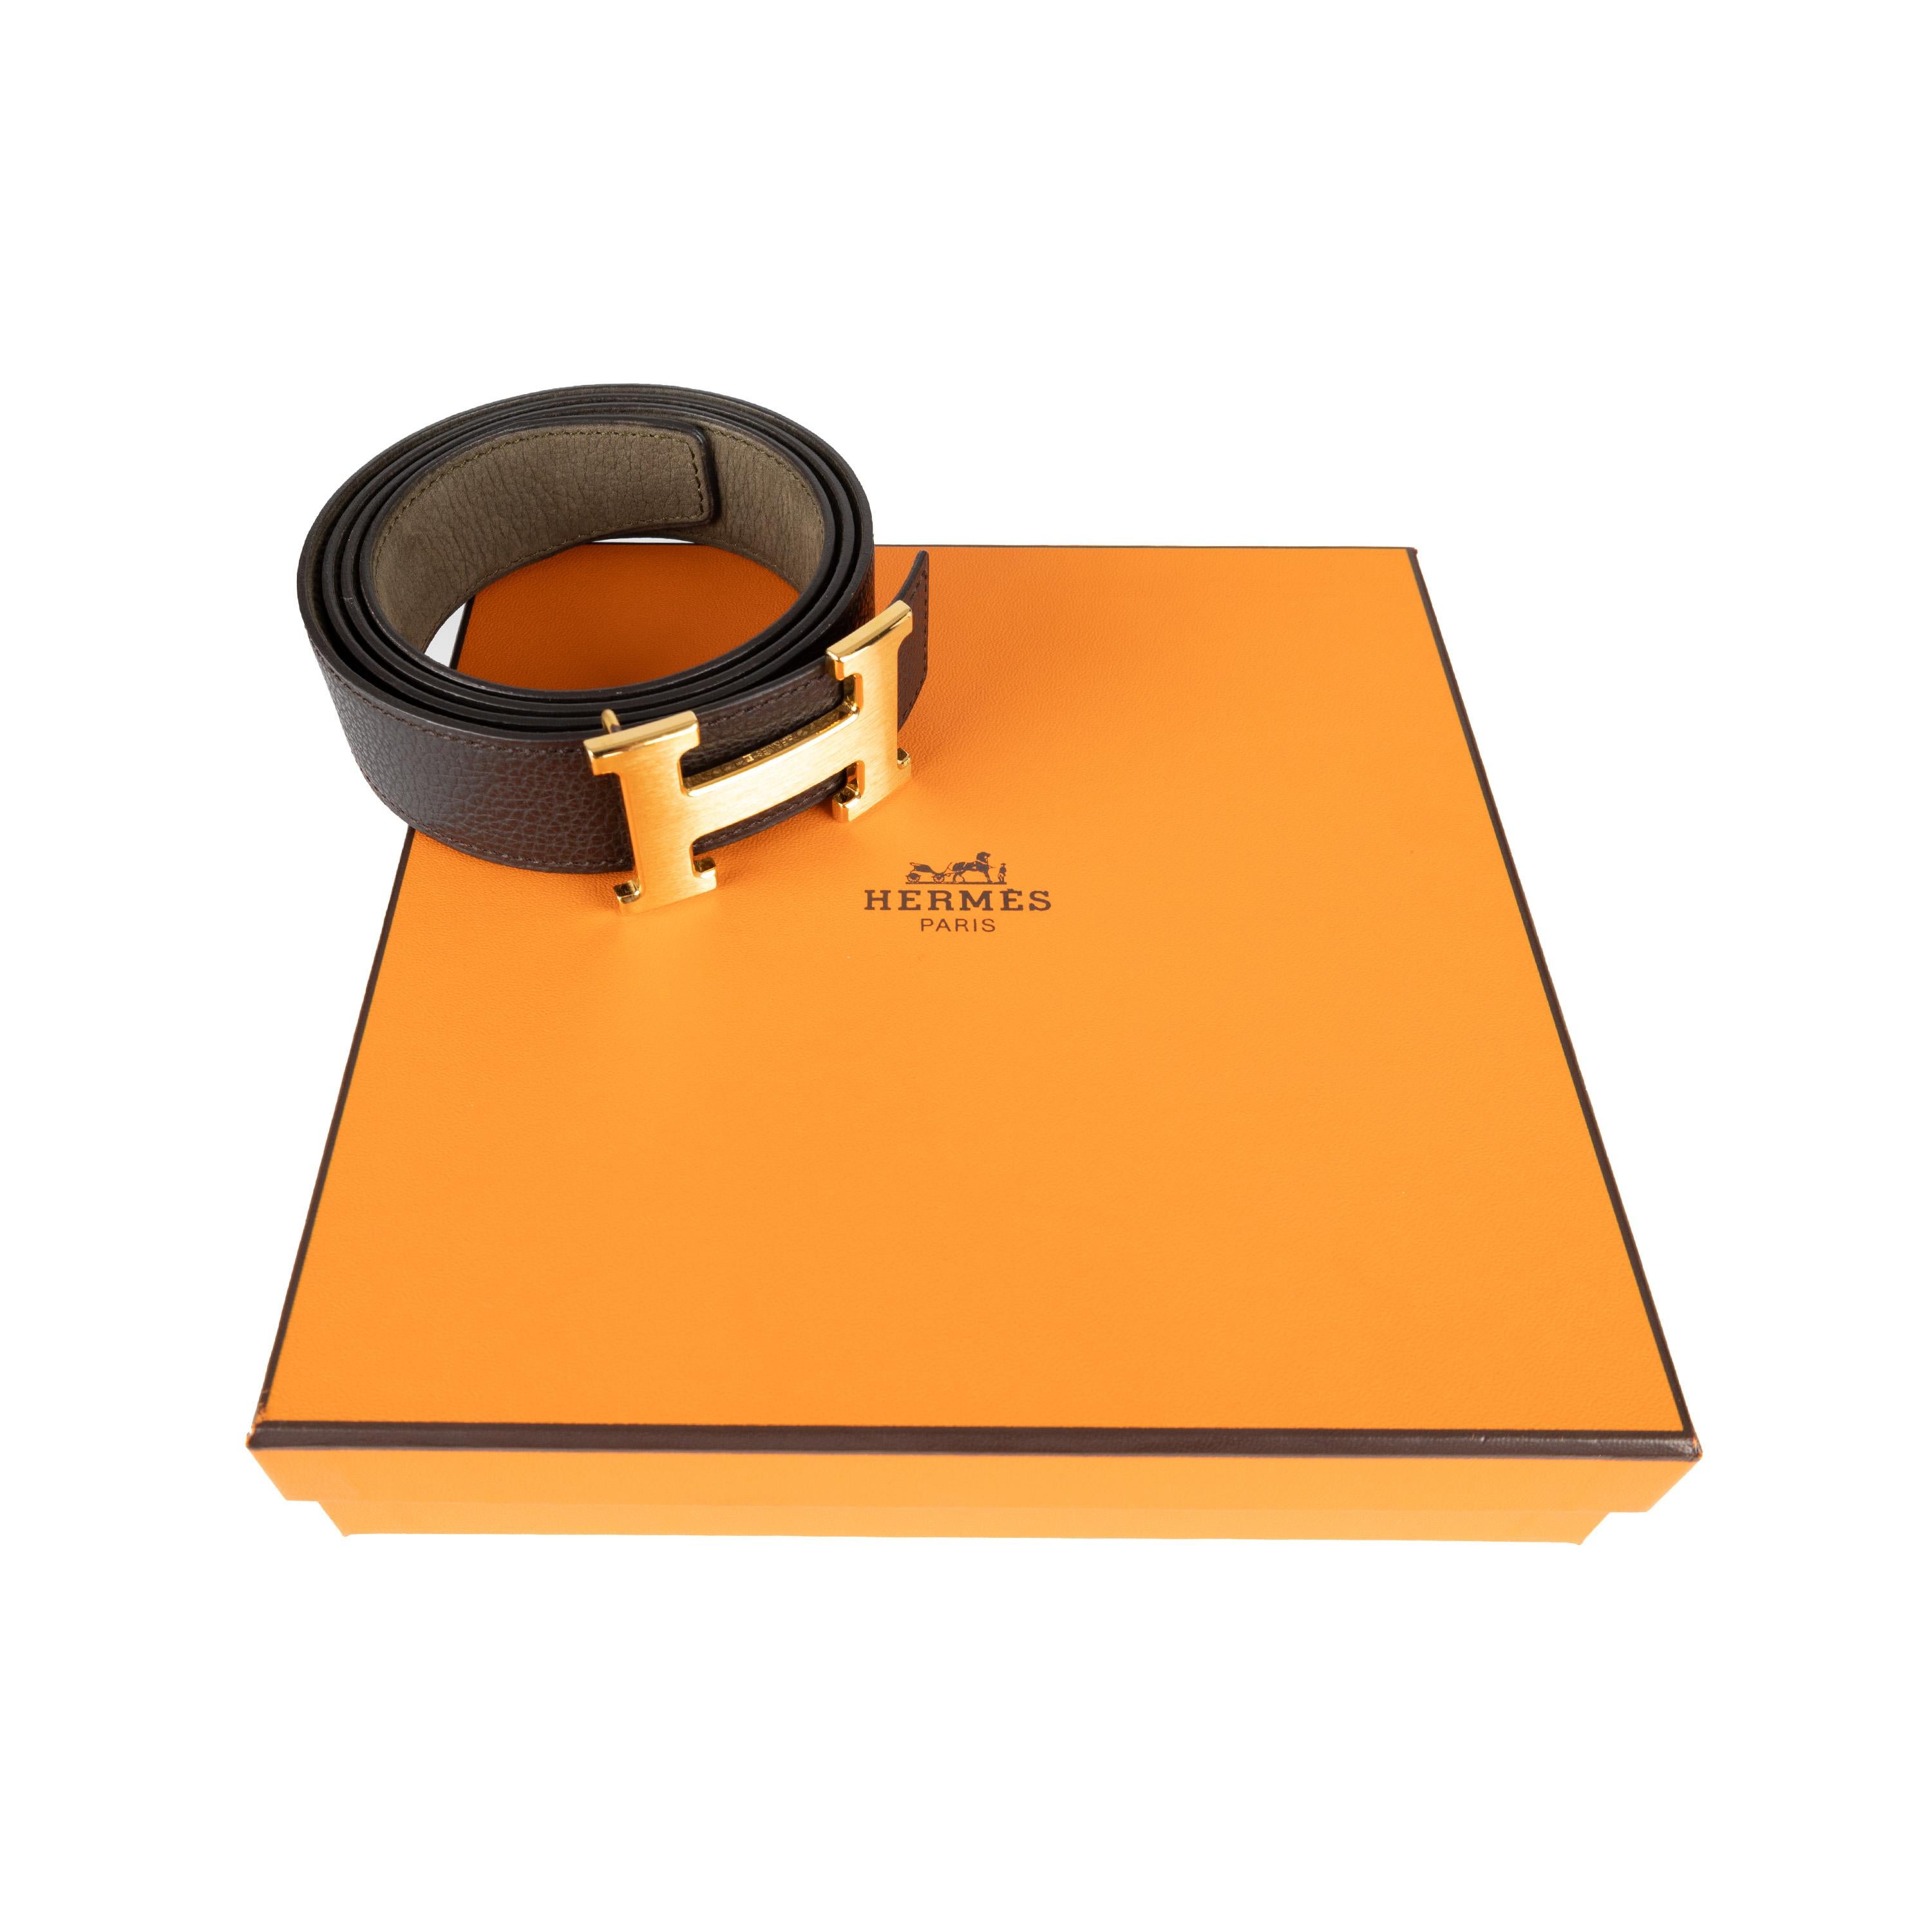 This Hermès H Buckle Reversible Leather Belt is the perfect accessory for your wardrobe. The leather is of the highest quality and the iconic Hermes H buckle is crafted with brushed brass in golden for a classic and sophisticated look. The